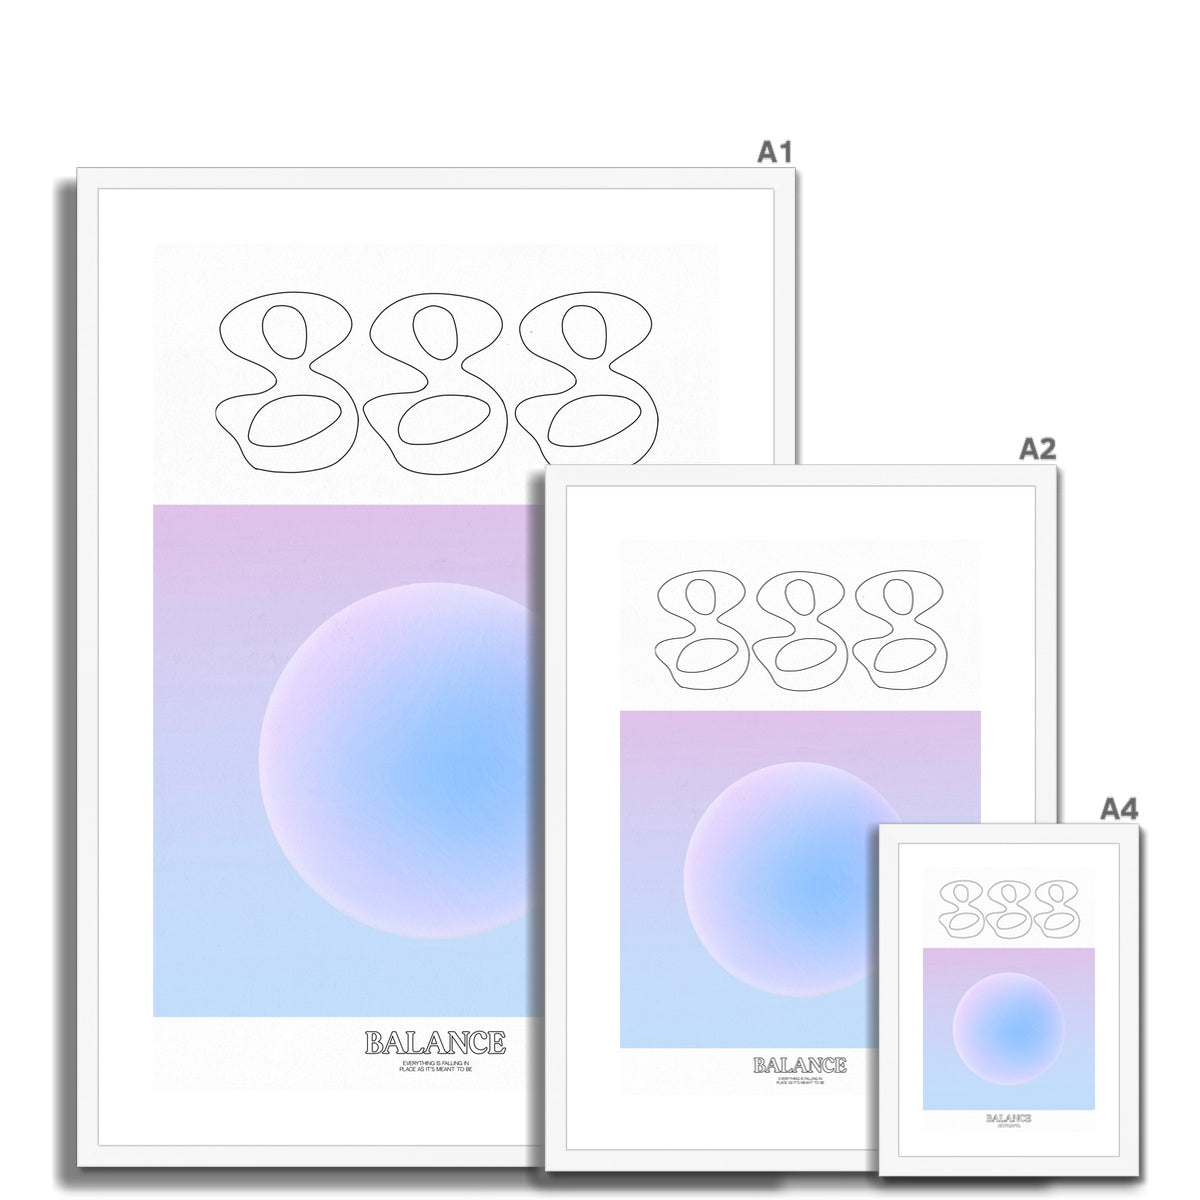 An angel number art print with a gradient aura. Add a touch of angel energy to your walls with a angel number auras. The perfect wall art posters to create a soft and dreamy aesthetic with your apartment or dorm decor. 888 Balance: Everything Is Falling Into Place As It’s Meant To Be.